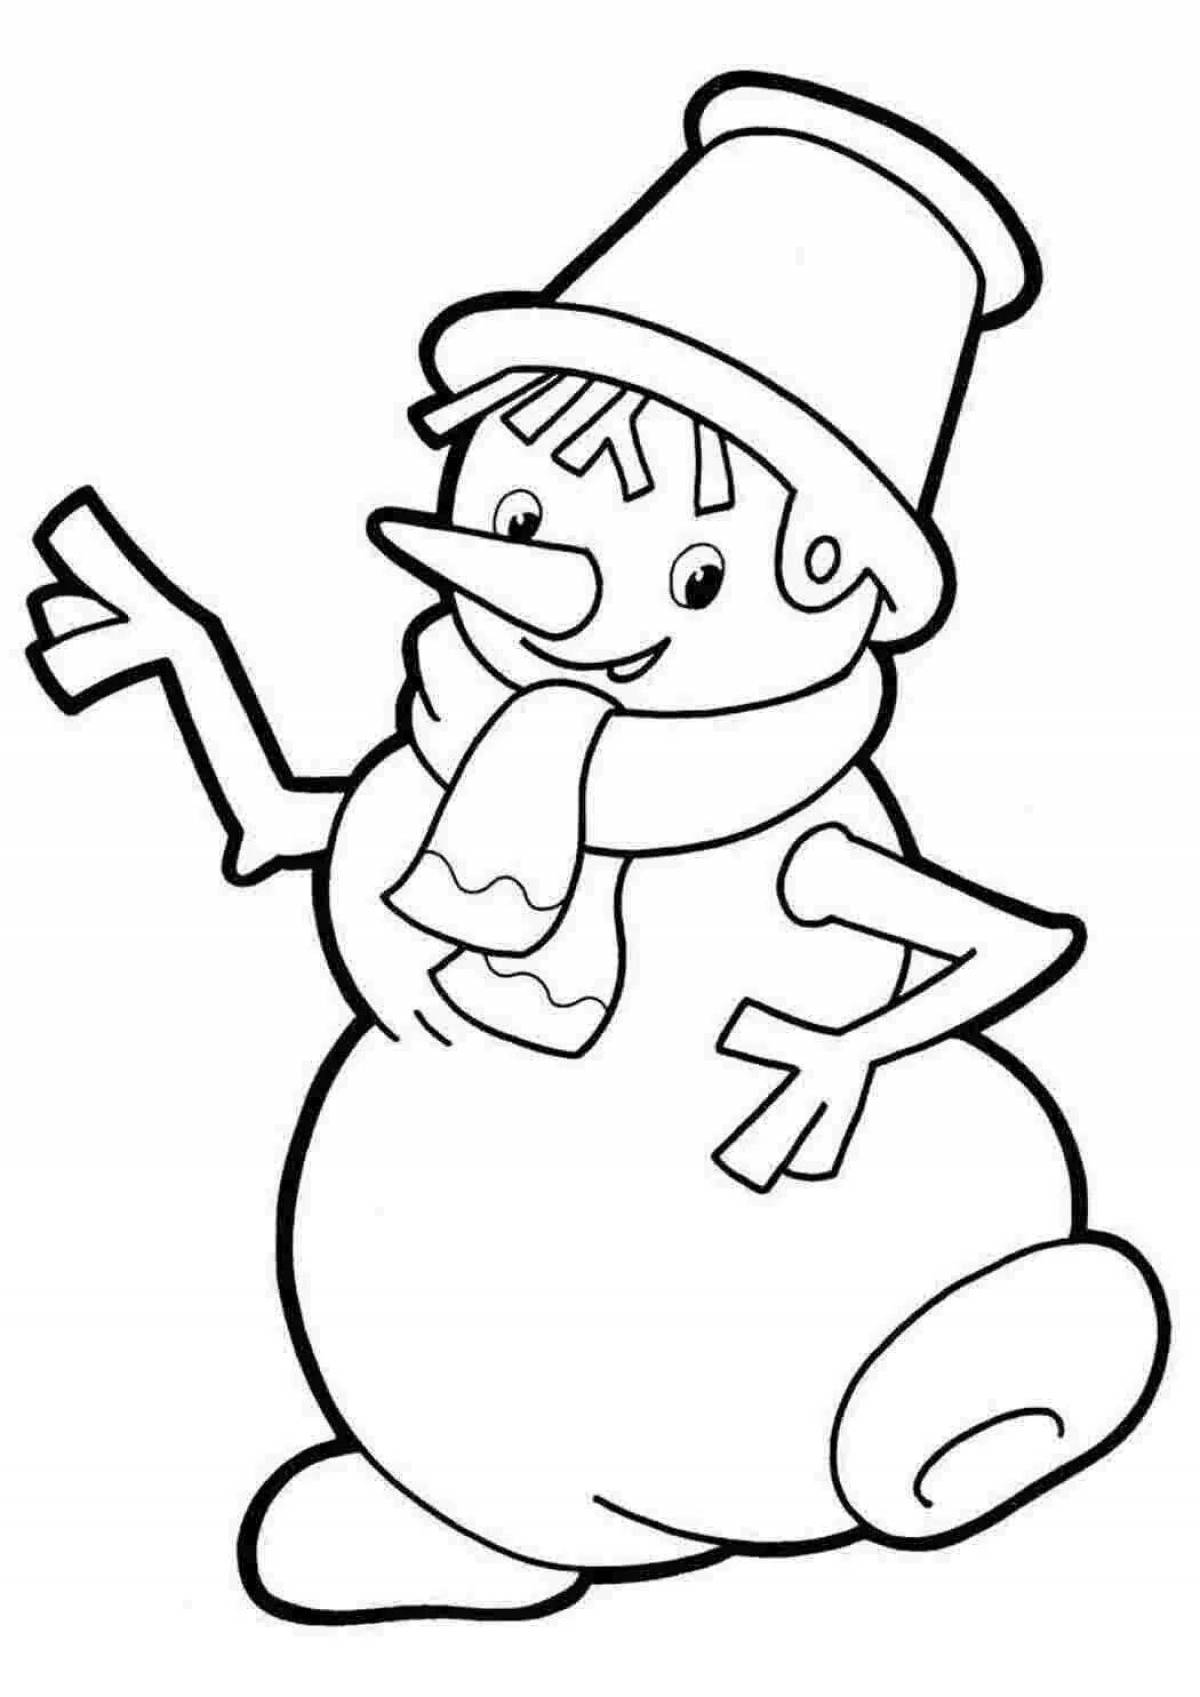 Adorable funny snowman coloring book for kids